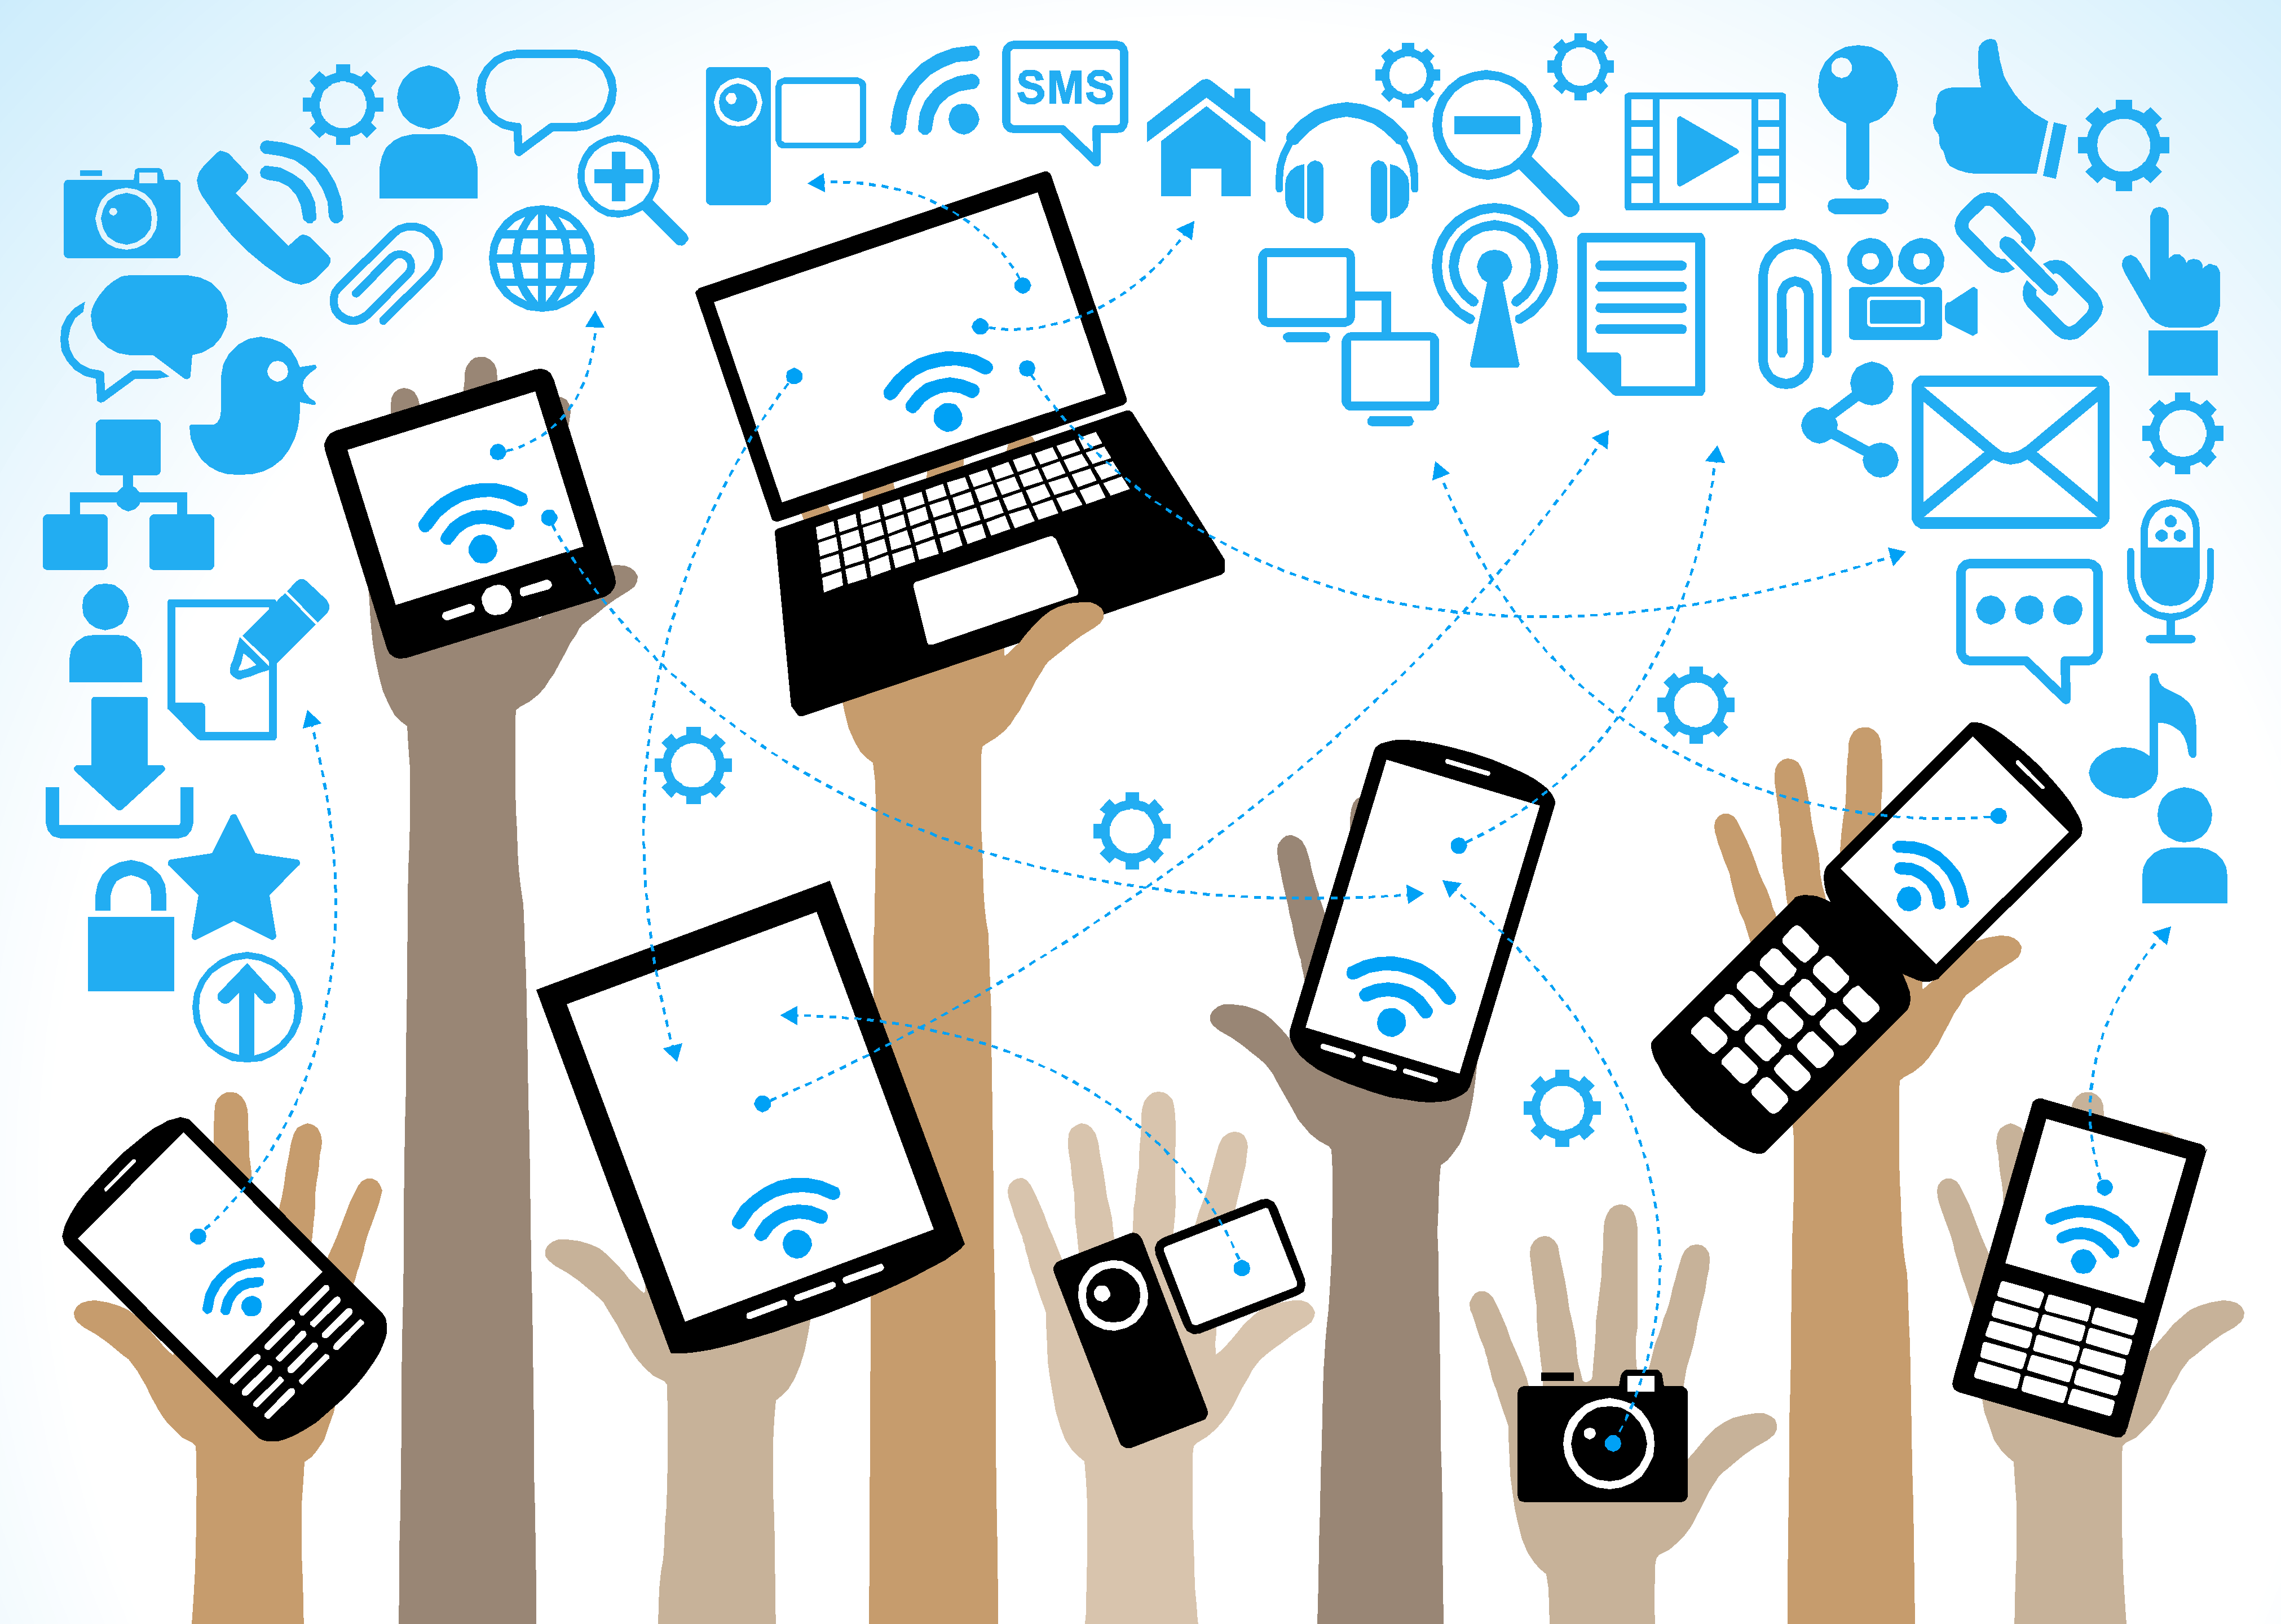 An illustration of people holding electronic items